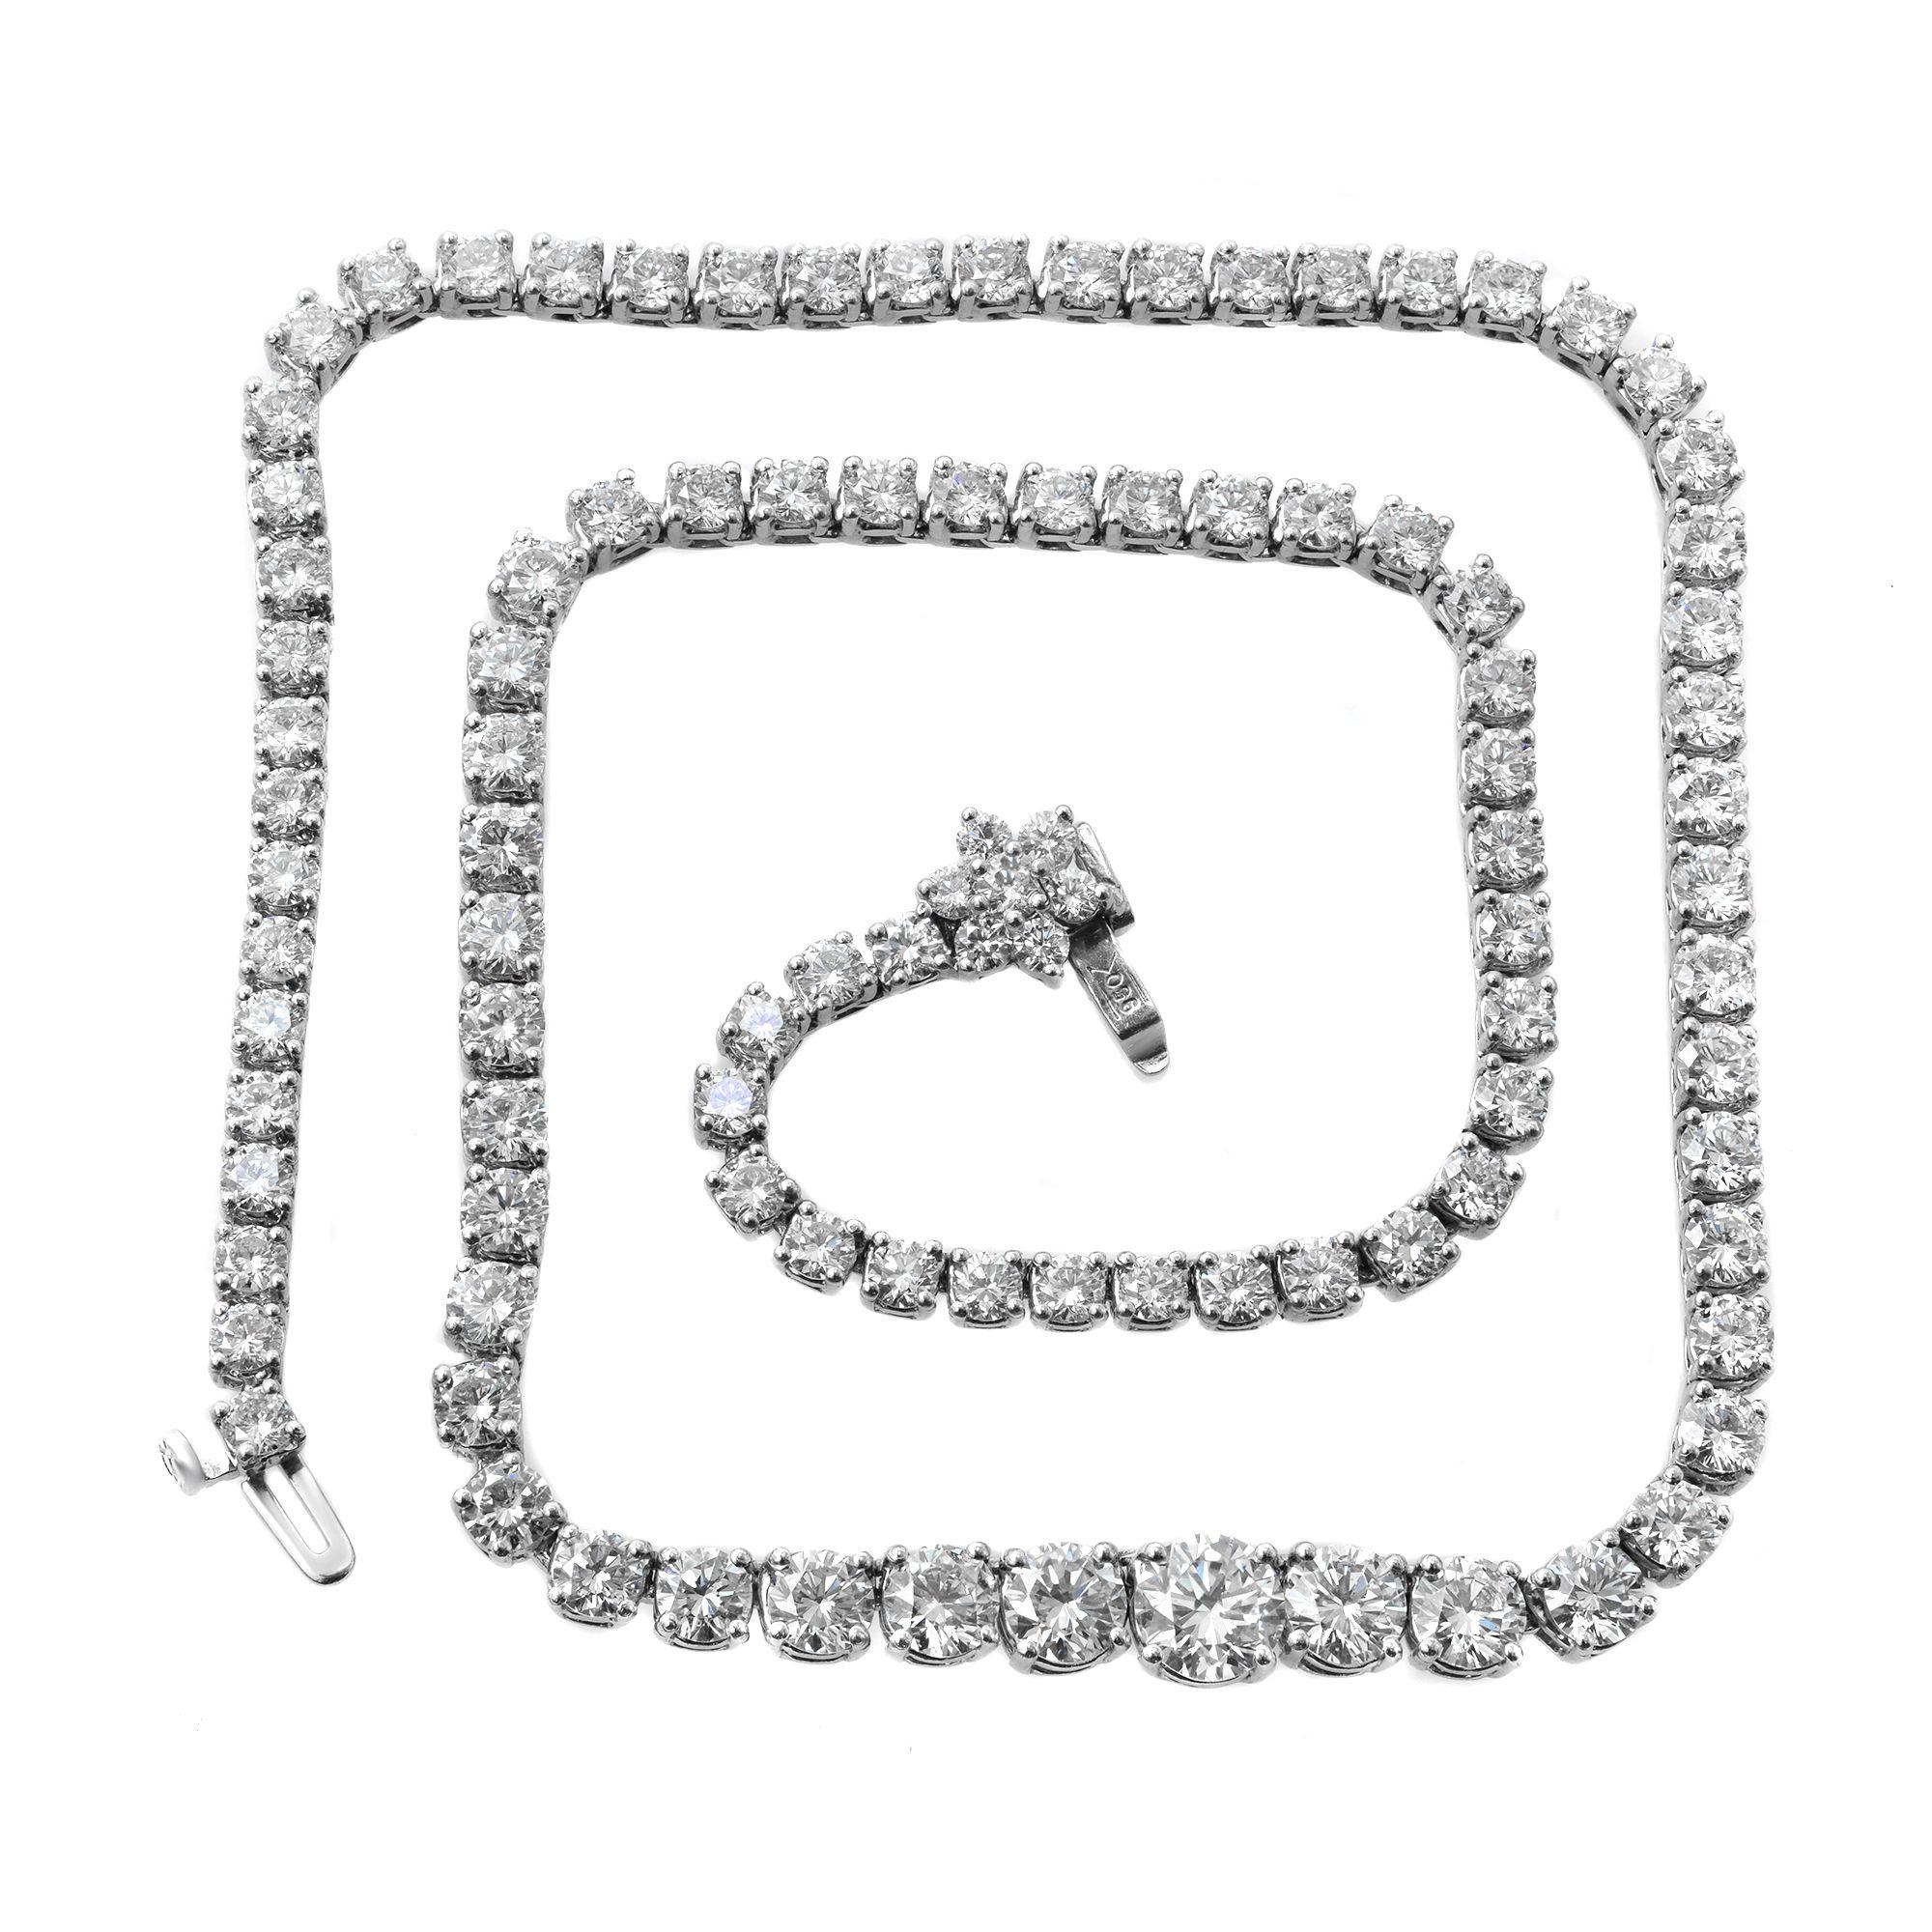 This Tennis necklace boasts 102 round-cut brilliant diamonds set in platinum 950. Features a push button clasp secured with addition safety hinged clasp. Total carat weight, approximately 20.00ct. Diamond color I and VS-SI clarity. Weight: 40.00 g.